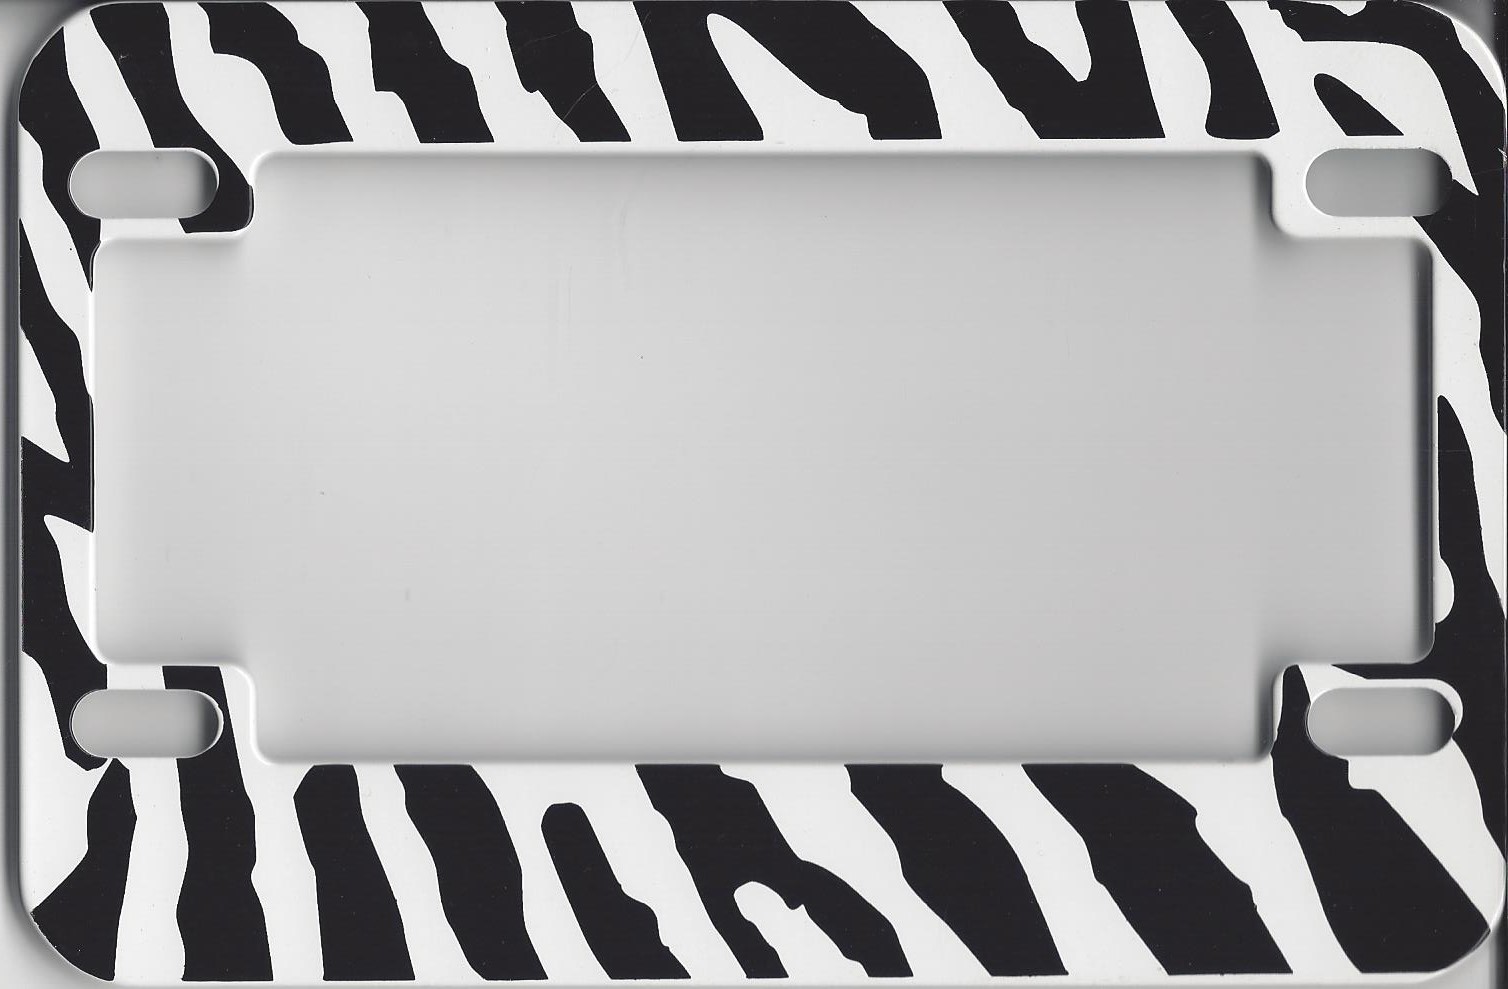 Zebra Print Motorcycle License Plate Frame Free SCREW Caps with this Frame